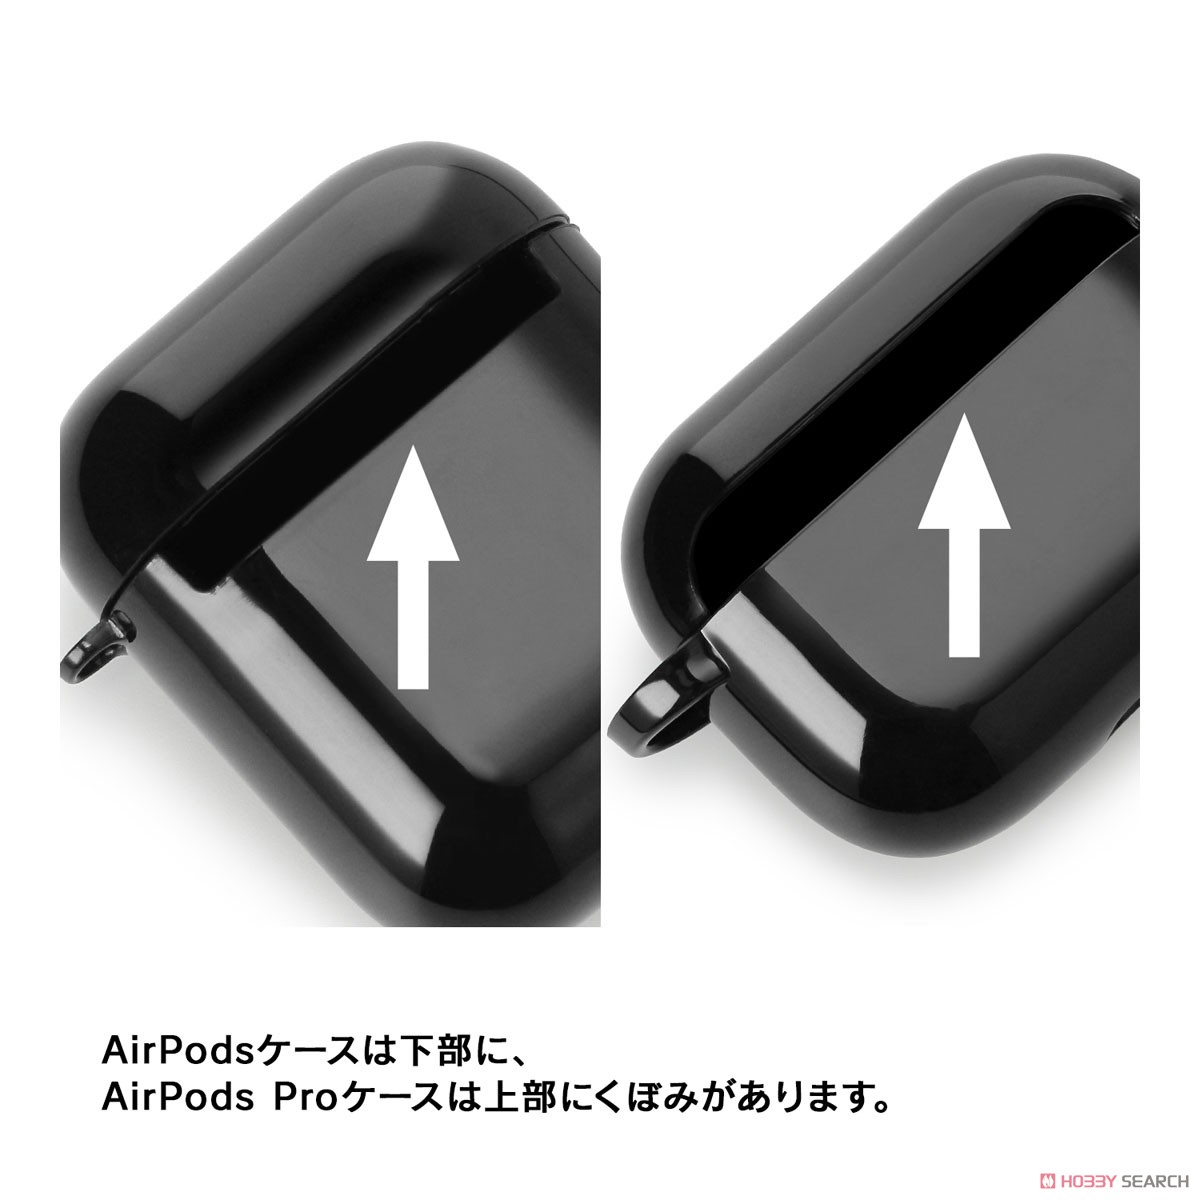 TVアニメ「最遊記RELOAD -ZEROIN-」 猪八戒 AirPodsケース(対応機種/AirPods Pro) (キャラクターグッズ) その他の画像4